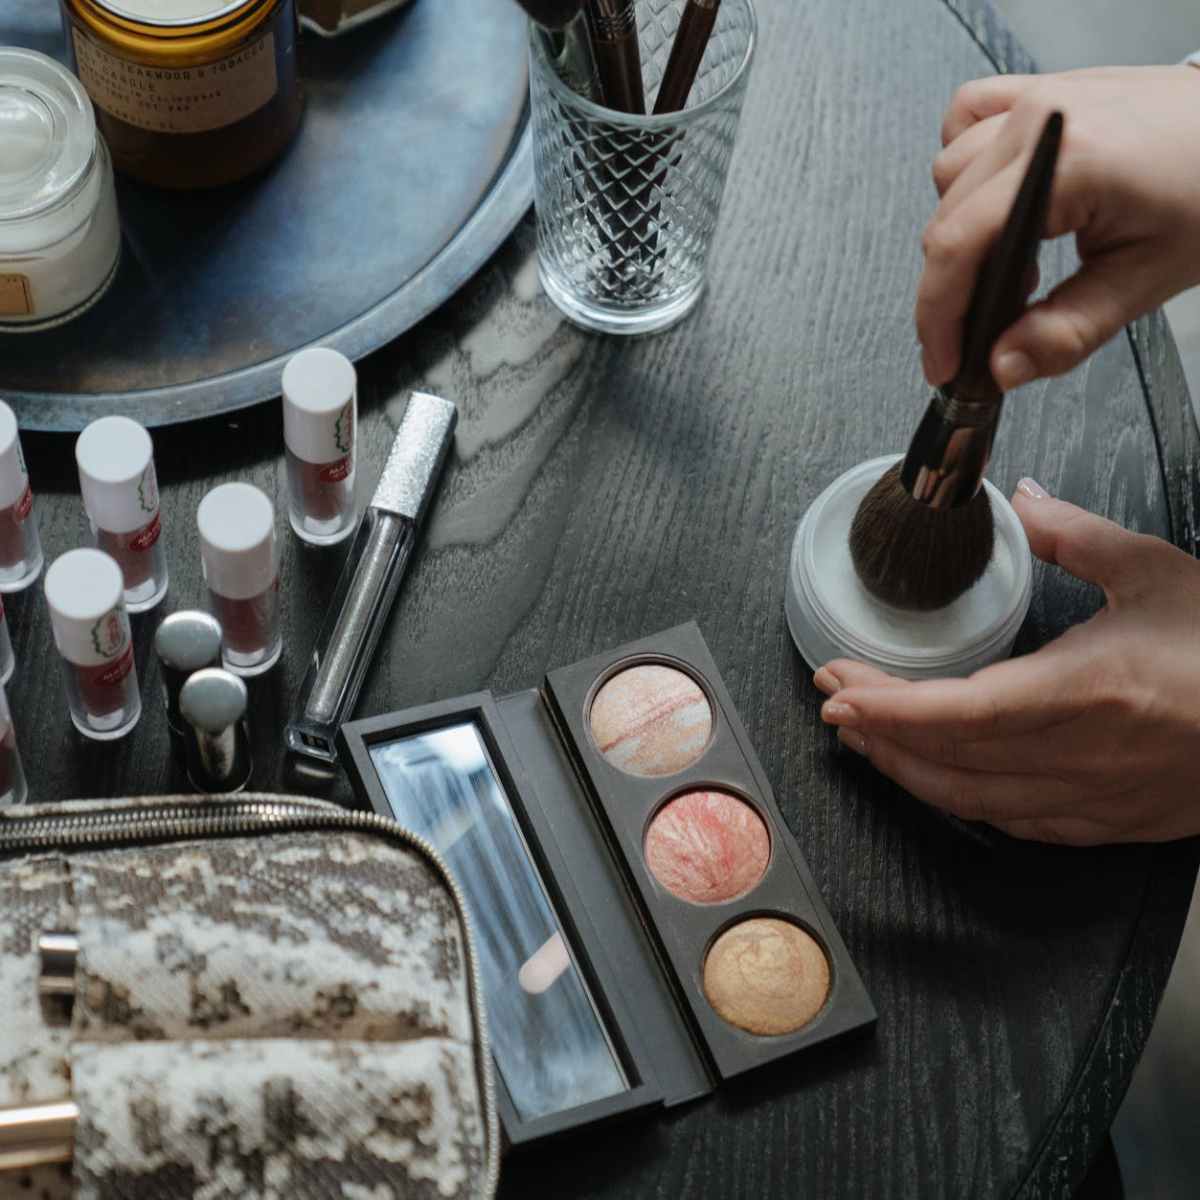 When Should You Throw Out Old Beauty Products?